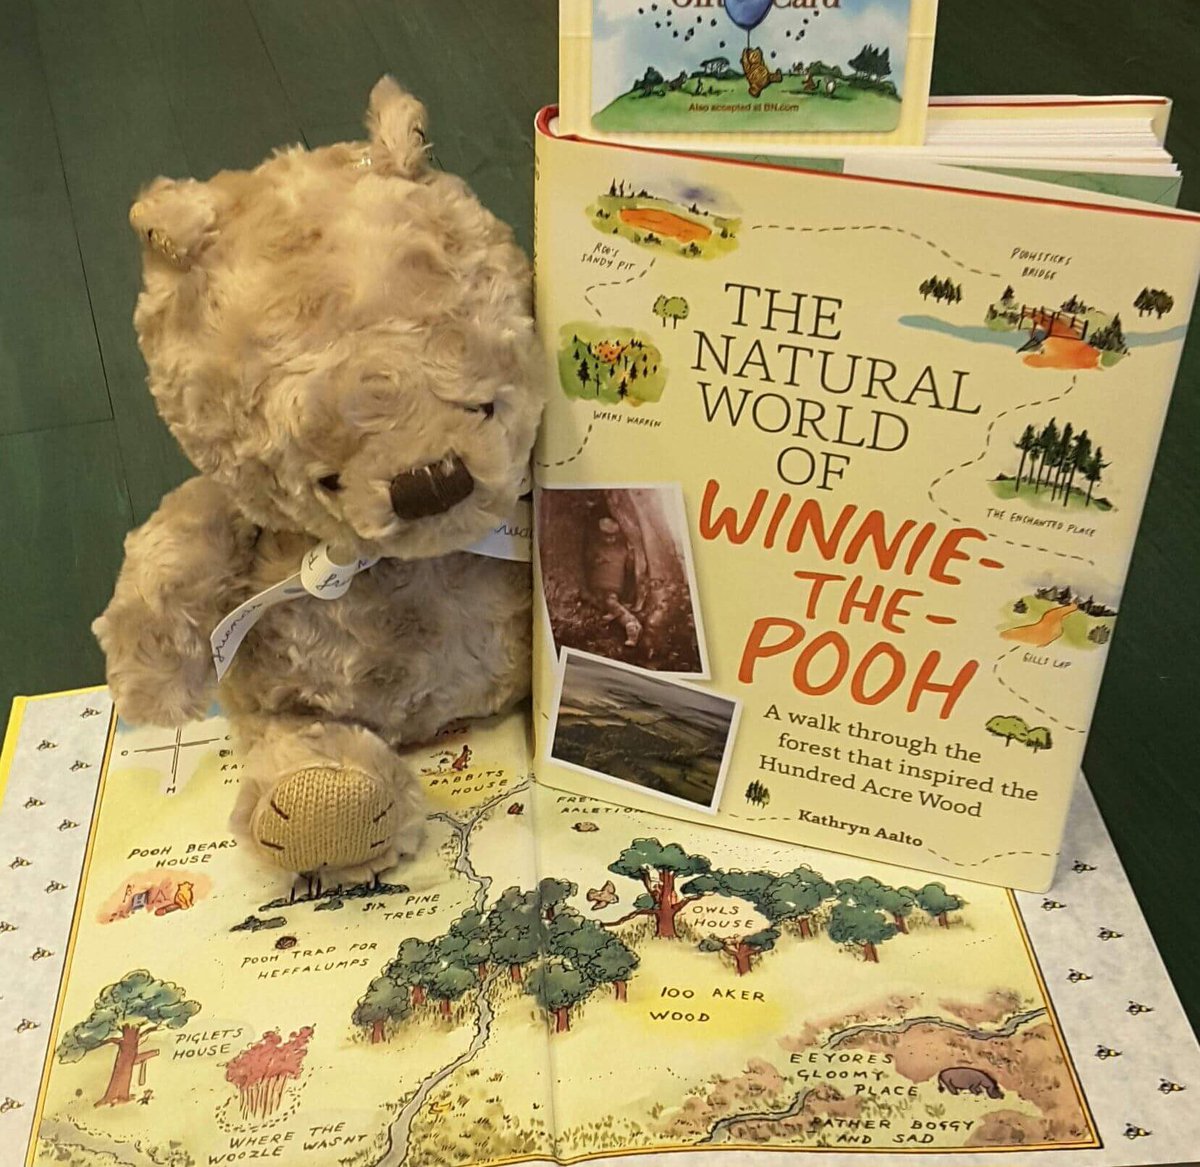 The Natural World of Winnie-the-Pooh: A Presentation by Kathryn Aalto